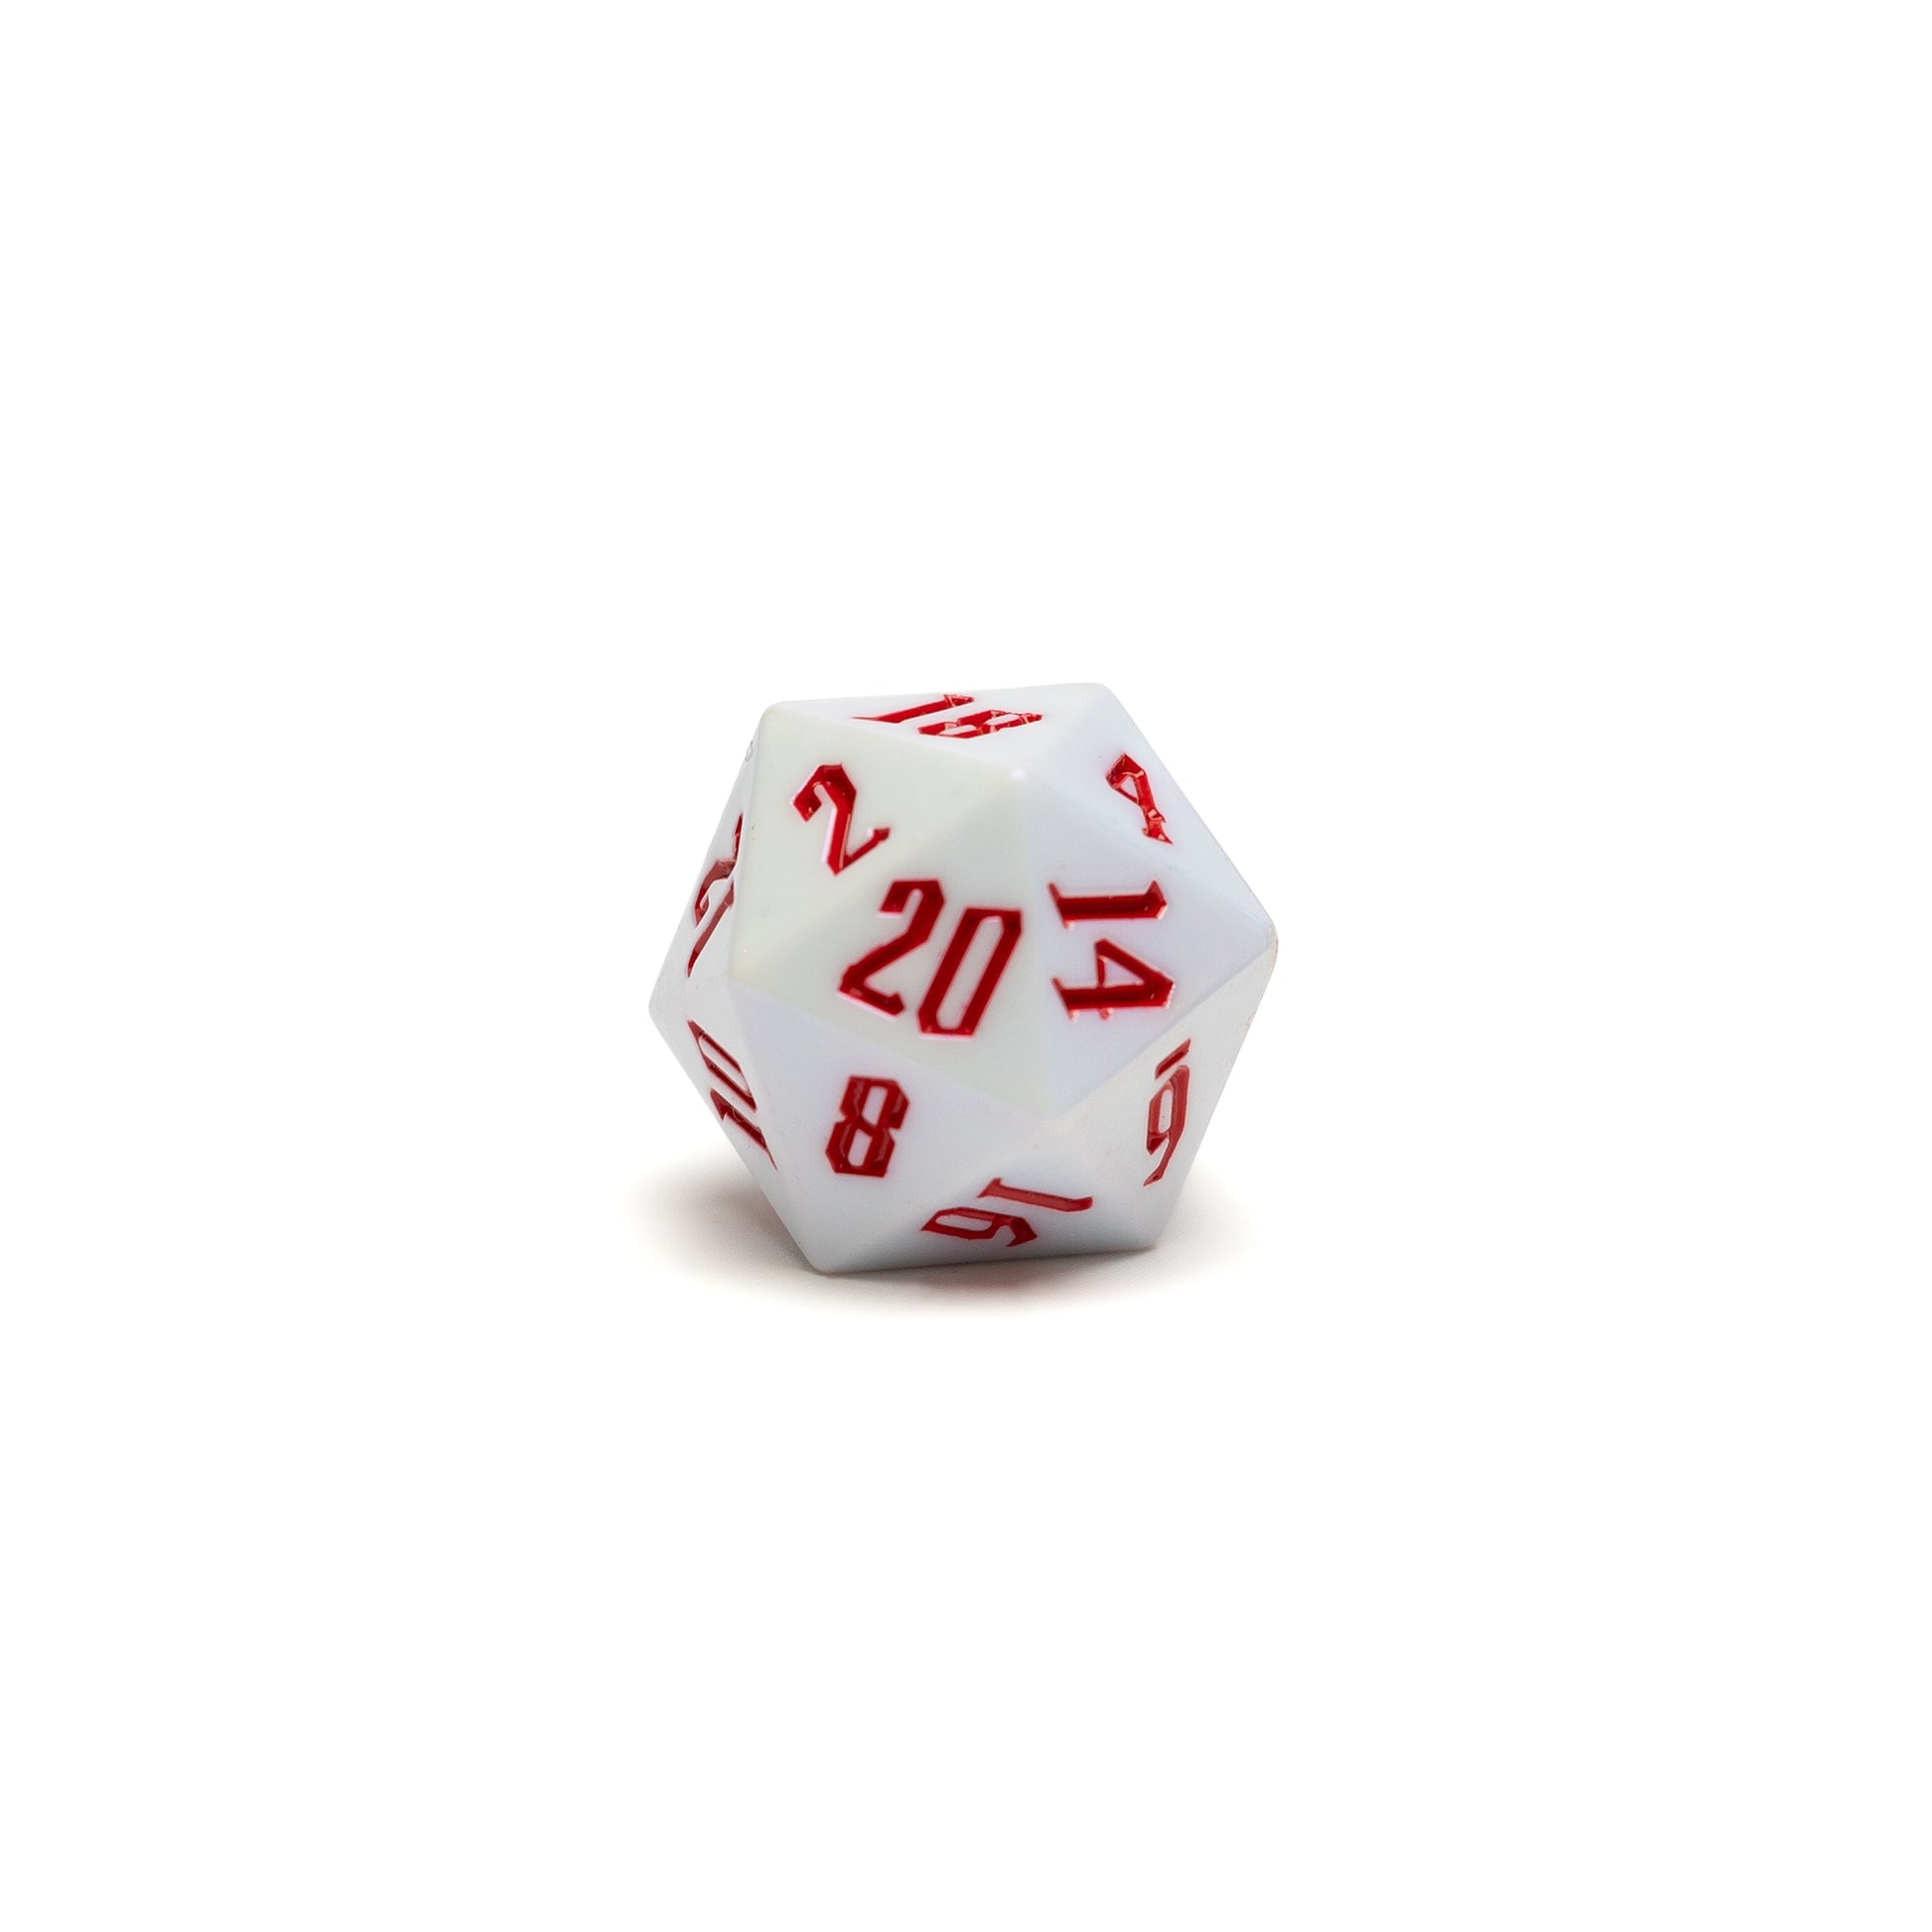 Roll Britannia Royal Guard Sharp Edged Electroplating Dungeons and Dragons D20 Dice with Red and White Aesthetic